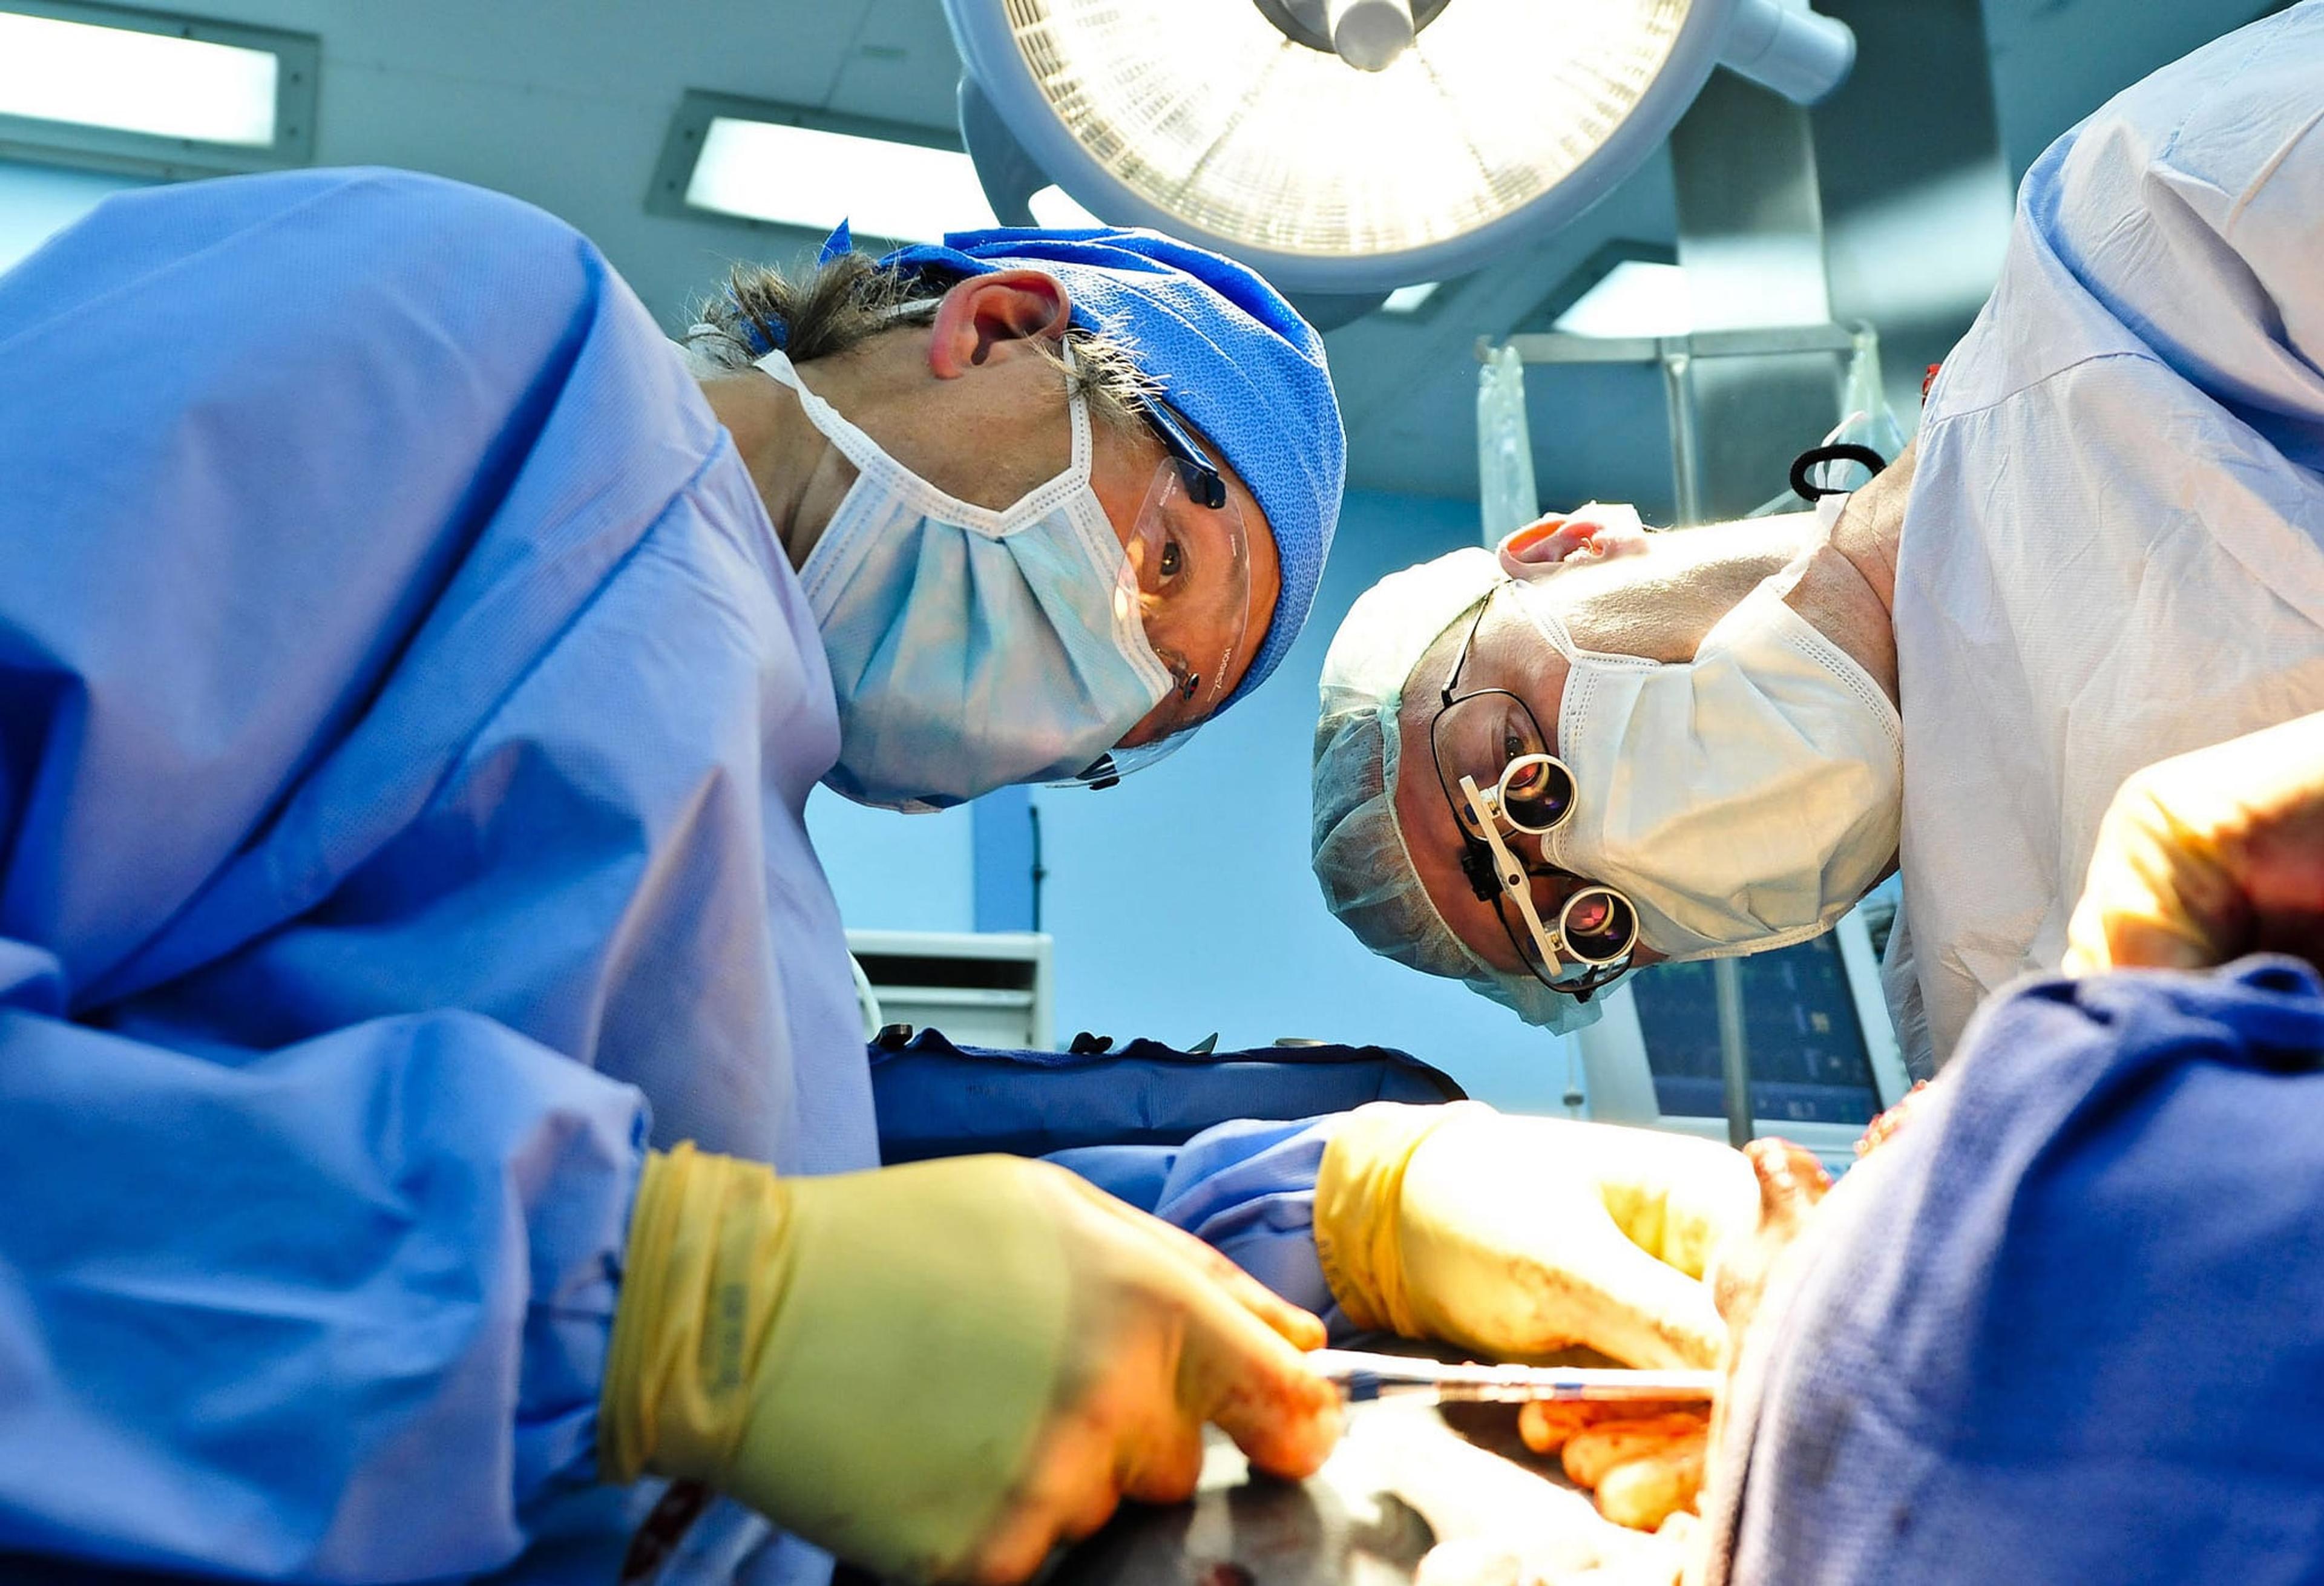 Two surgeons working on a patient.